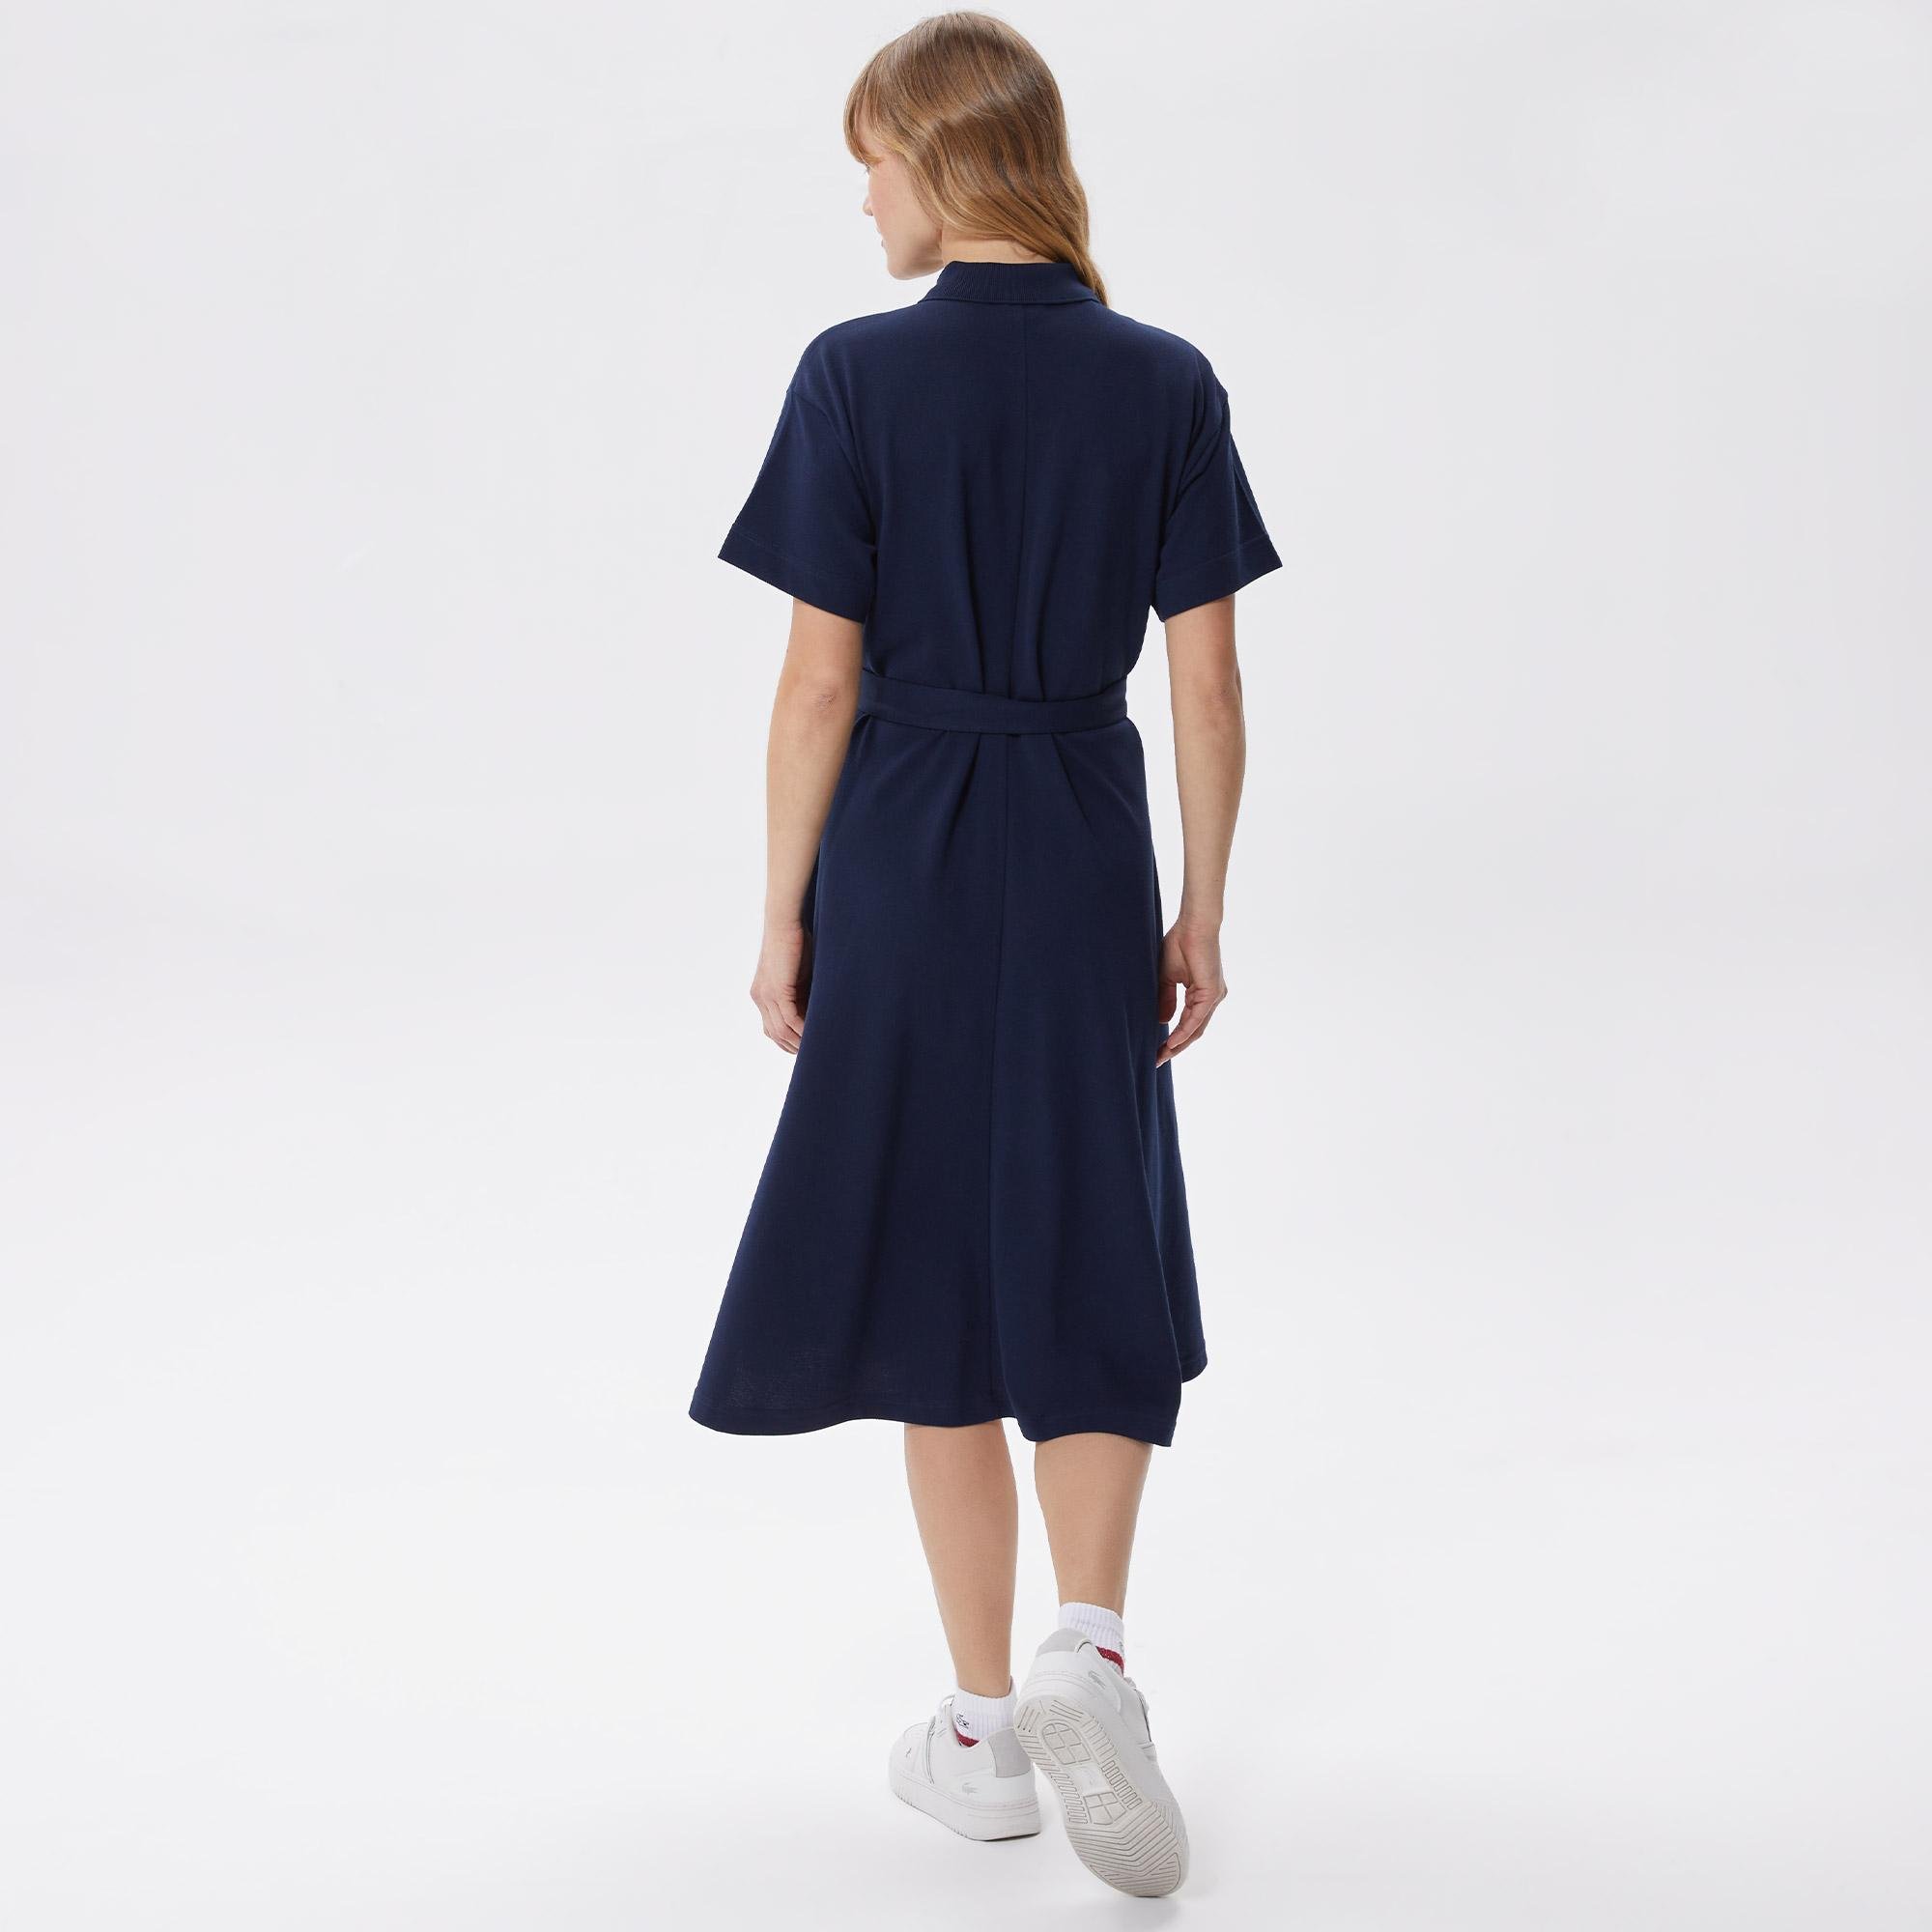 Lacoste Women's polo dress with collar in navy blue